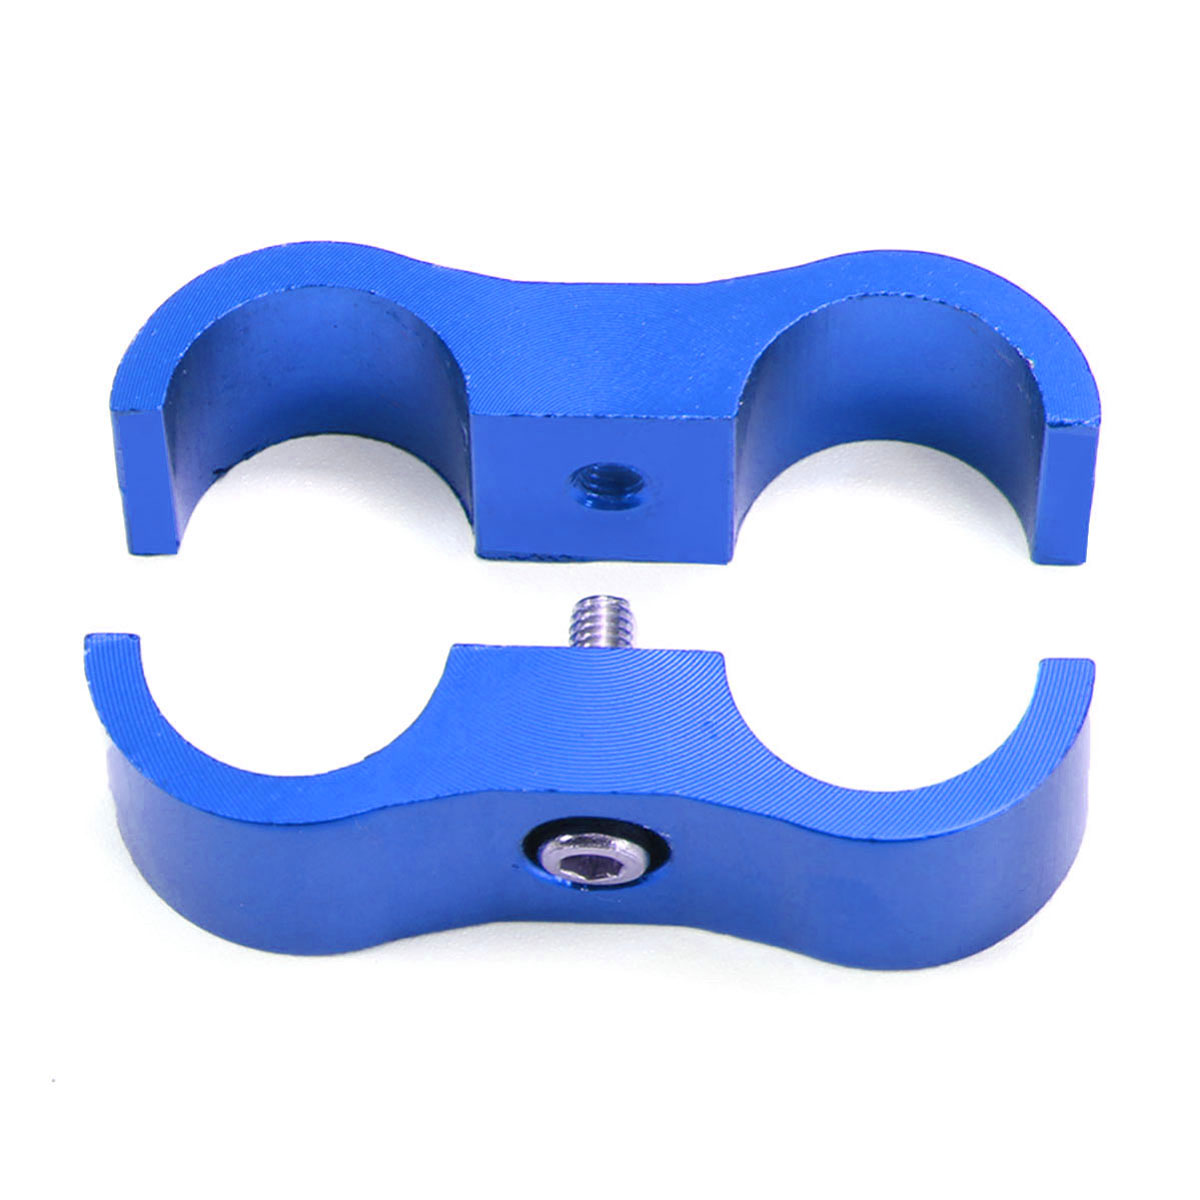 CNC-AN-6-AN6-134MM-Blue-Braided-Hose-Separator-Clamp-Fitting-Adapter-Bracket-1279582